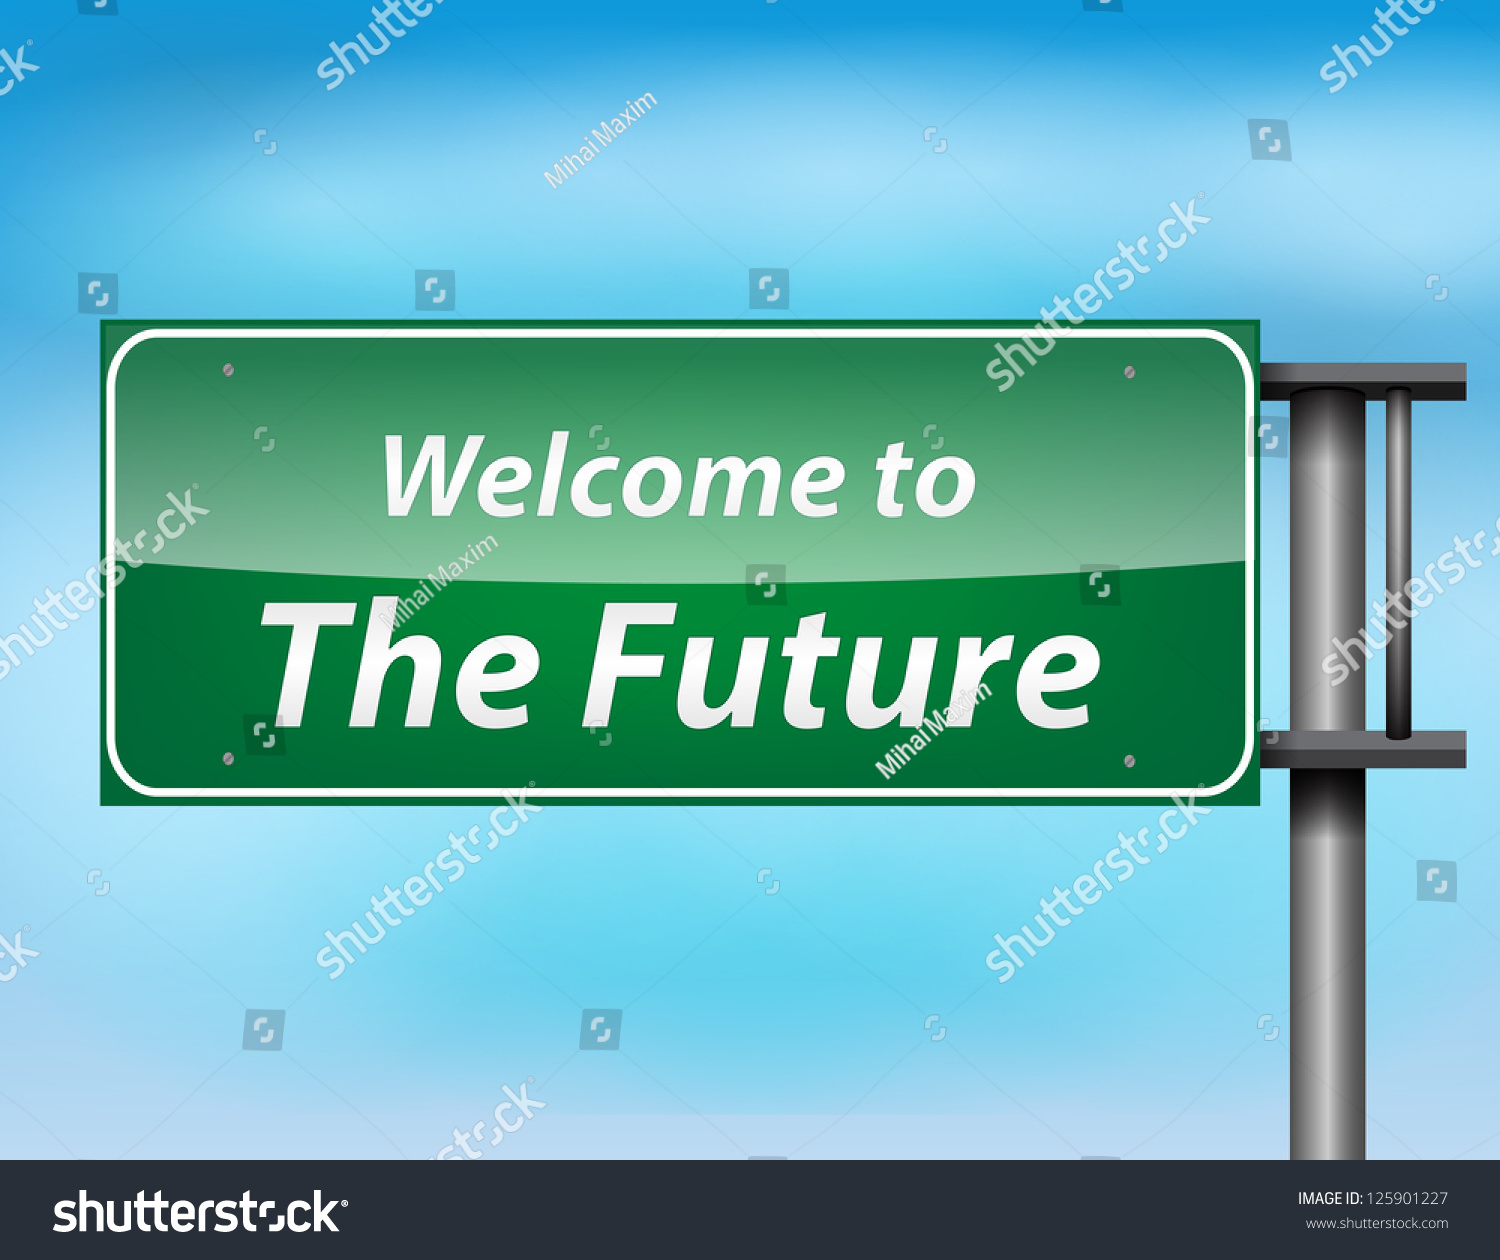 Glossy Highway Sign With Welcome To The Future Text On A Blue